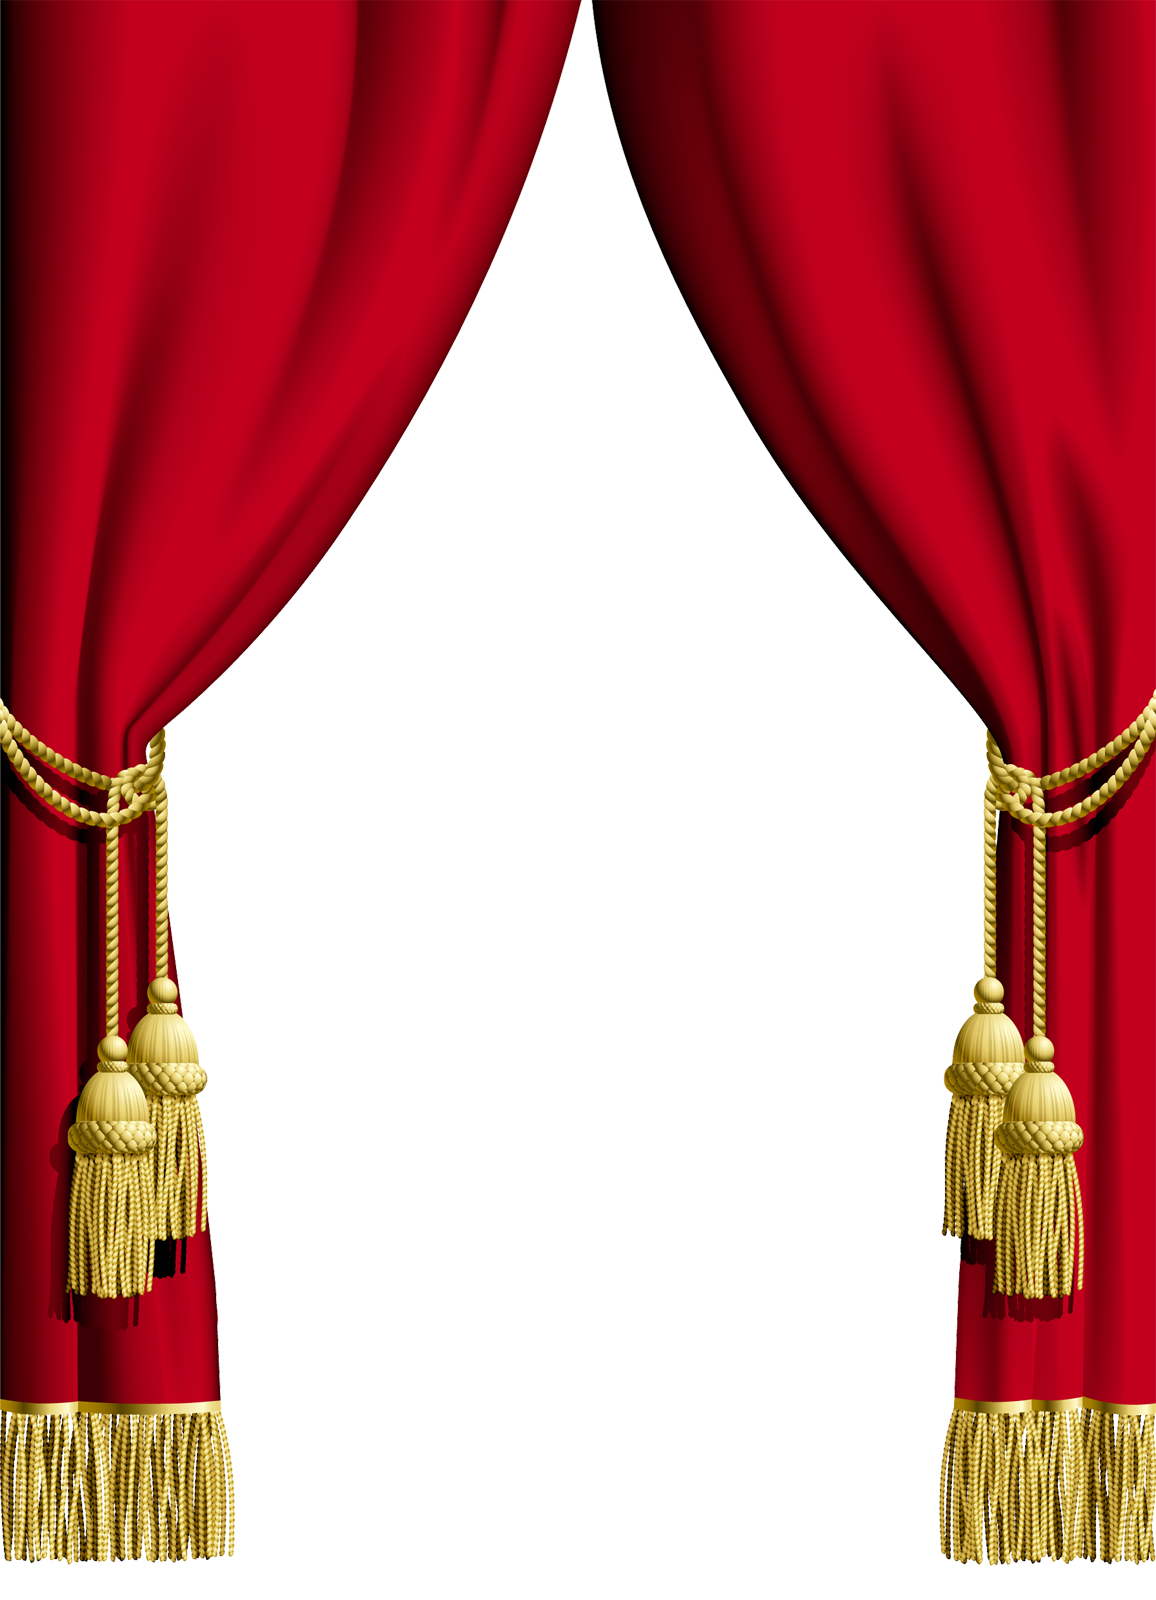 Curtains clipart real. Png images free download